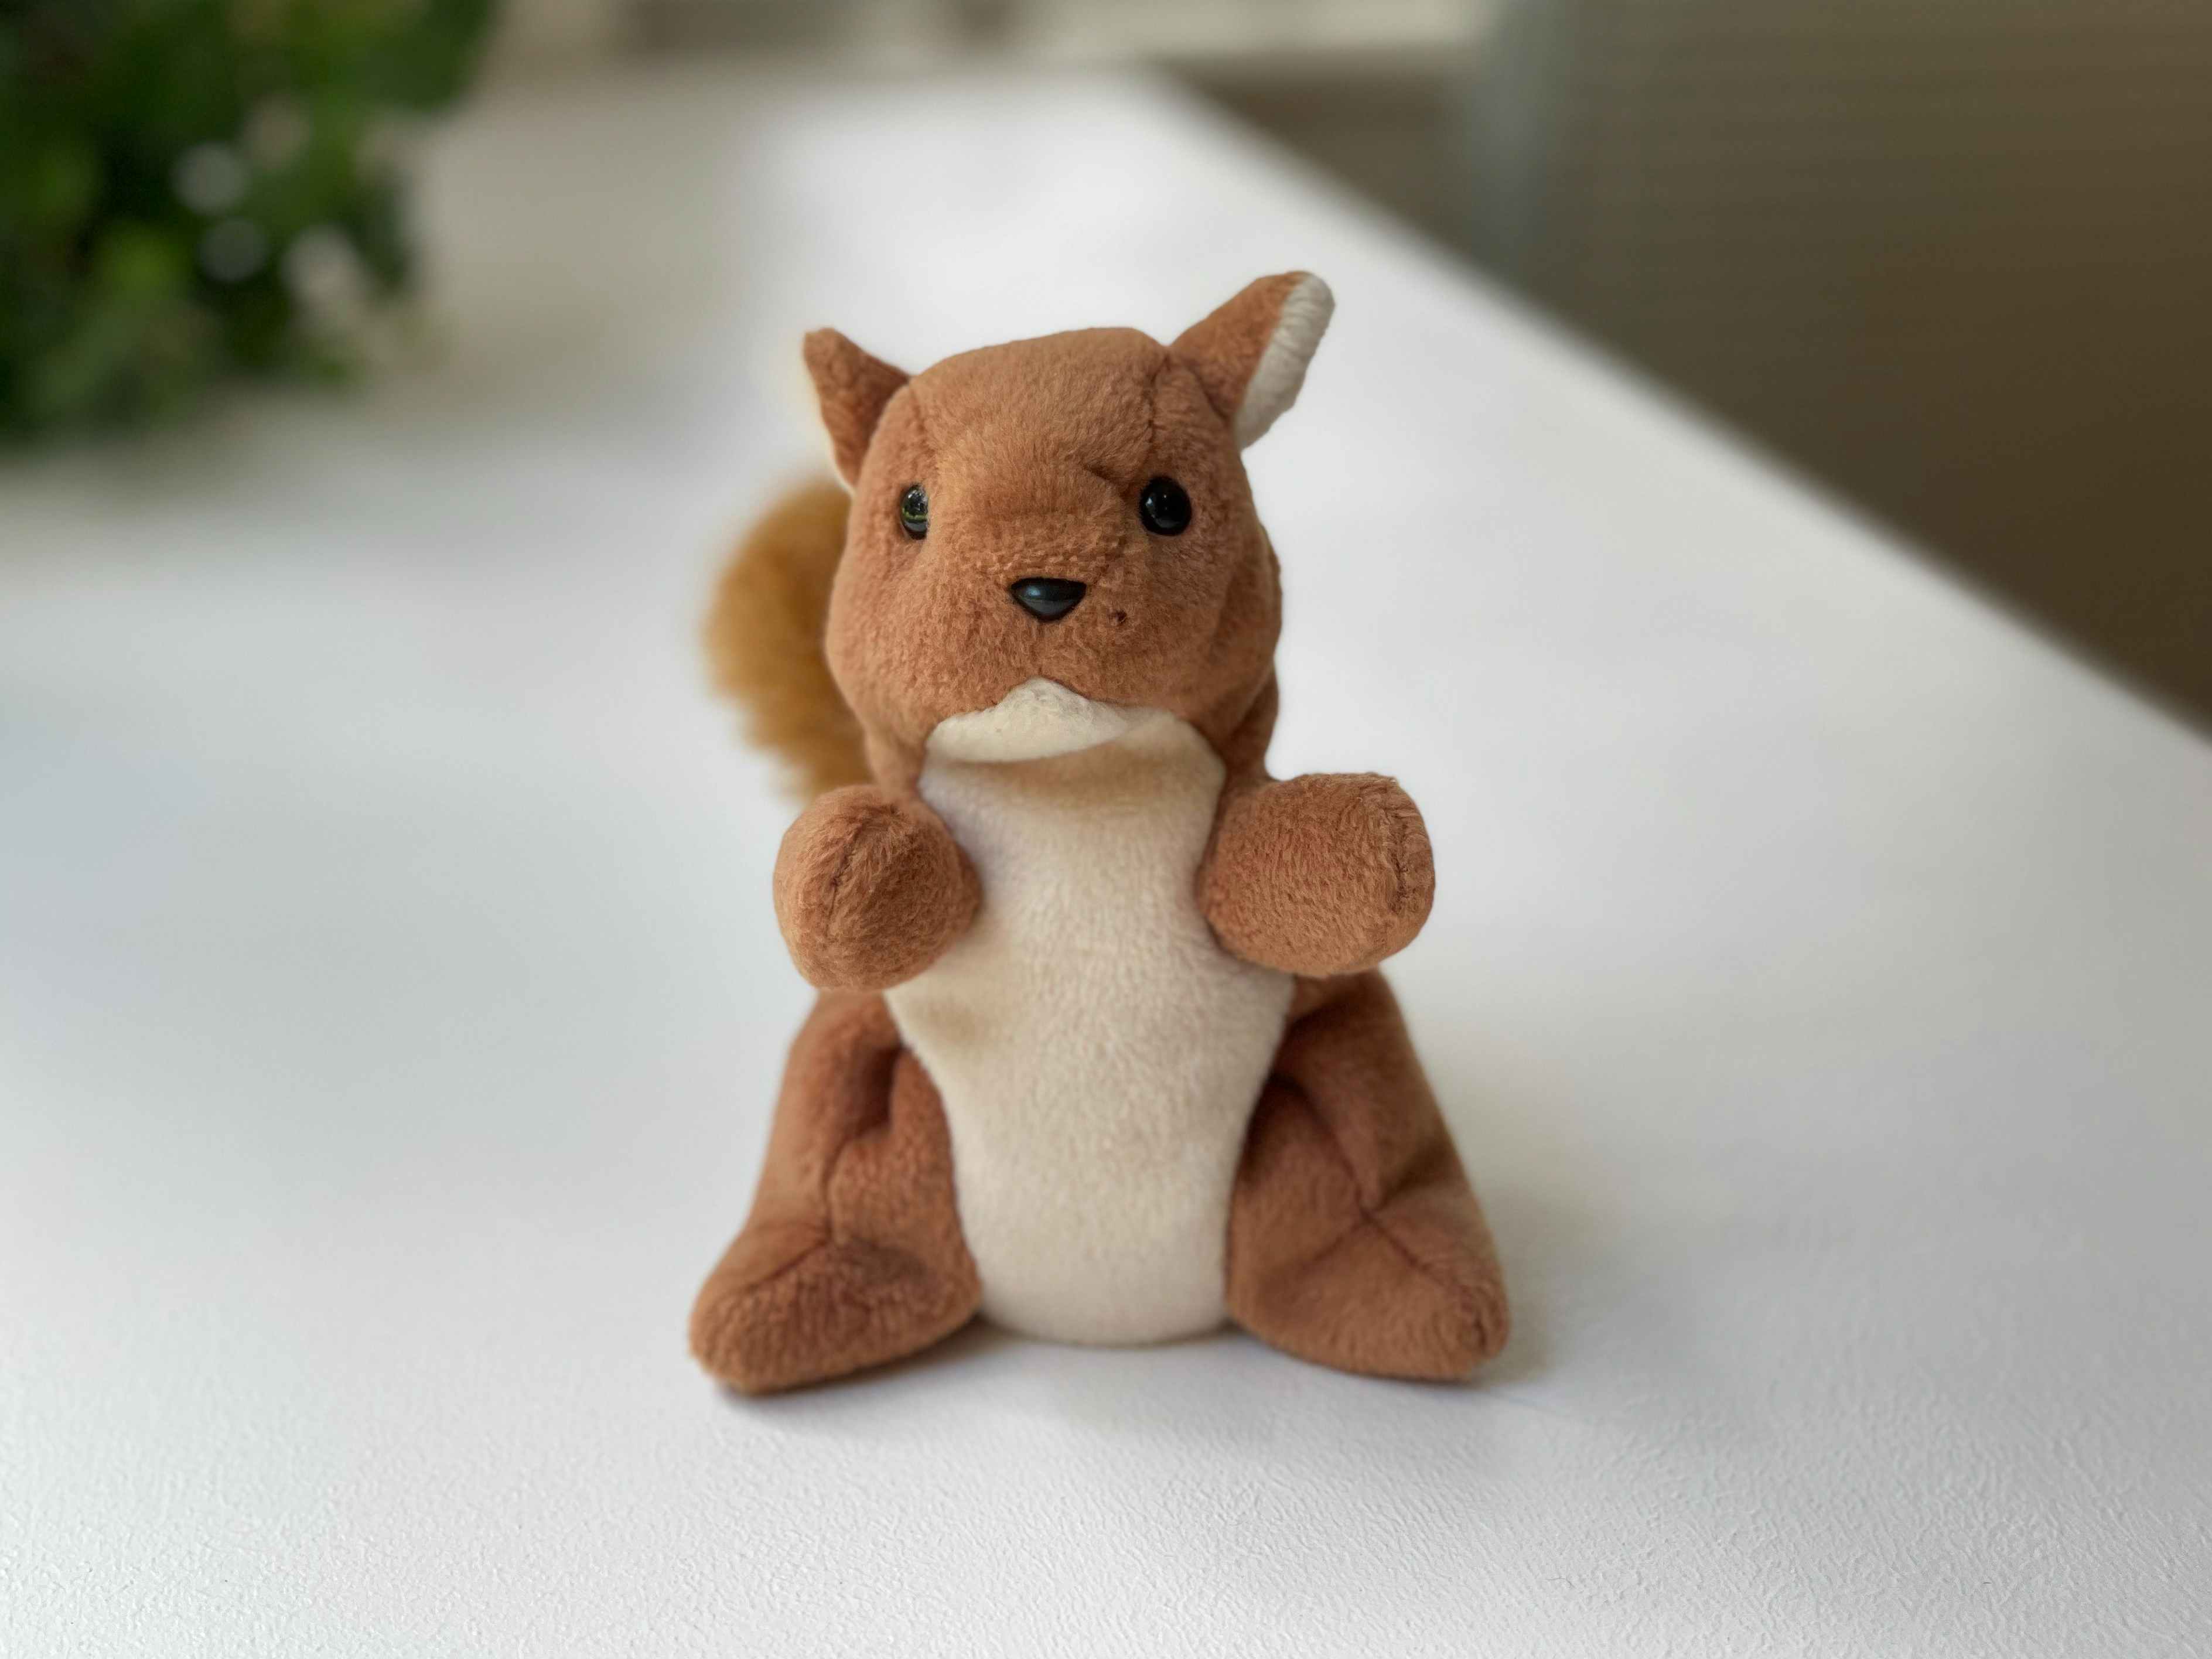 A Nuts the Squirrel beanie baby sitting on a white table.